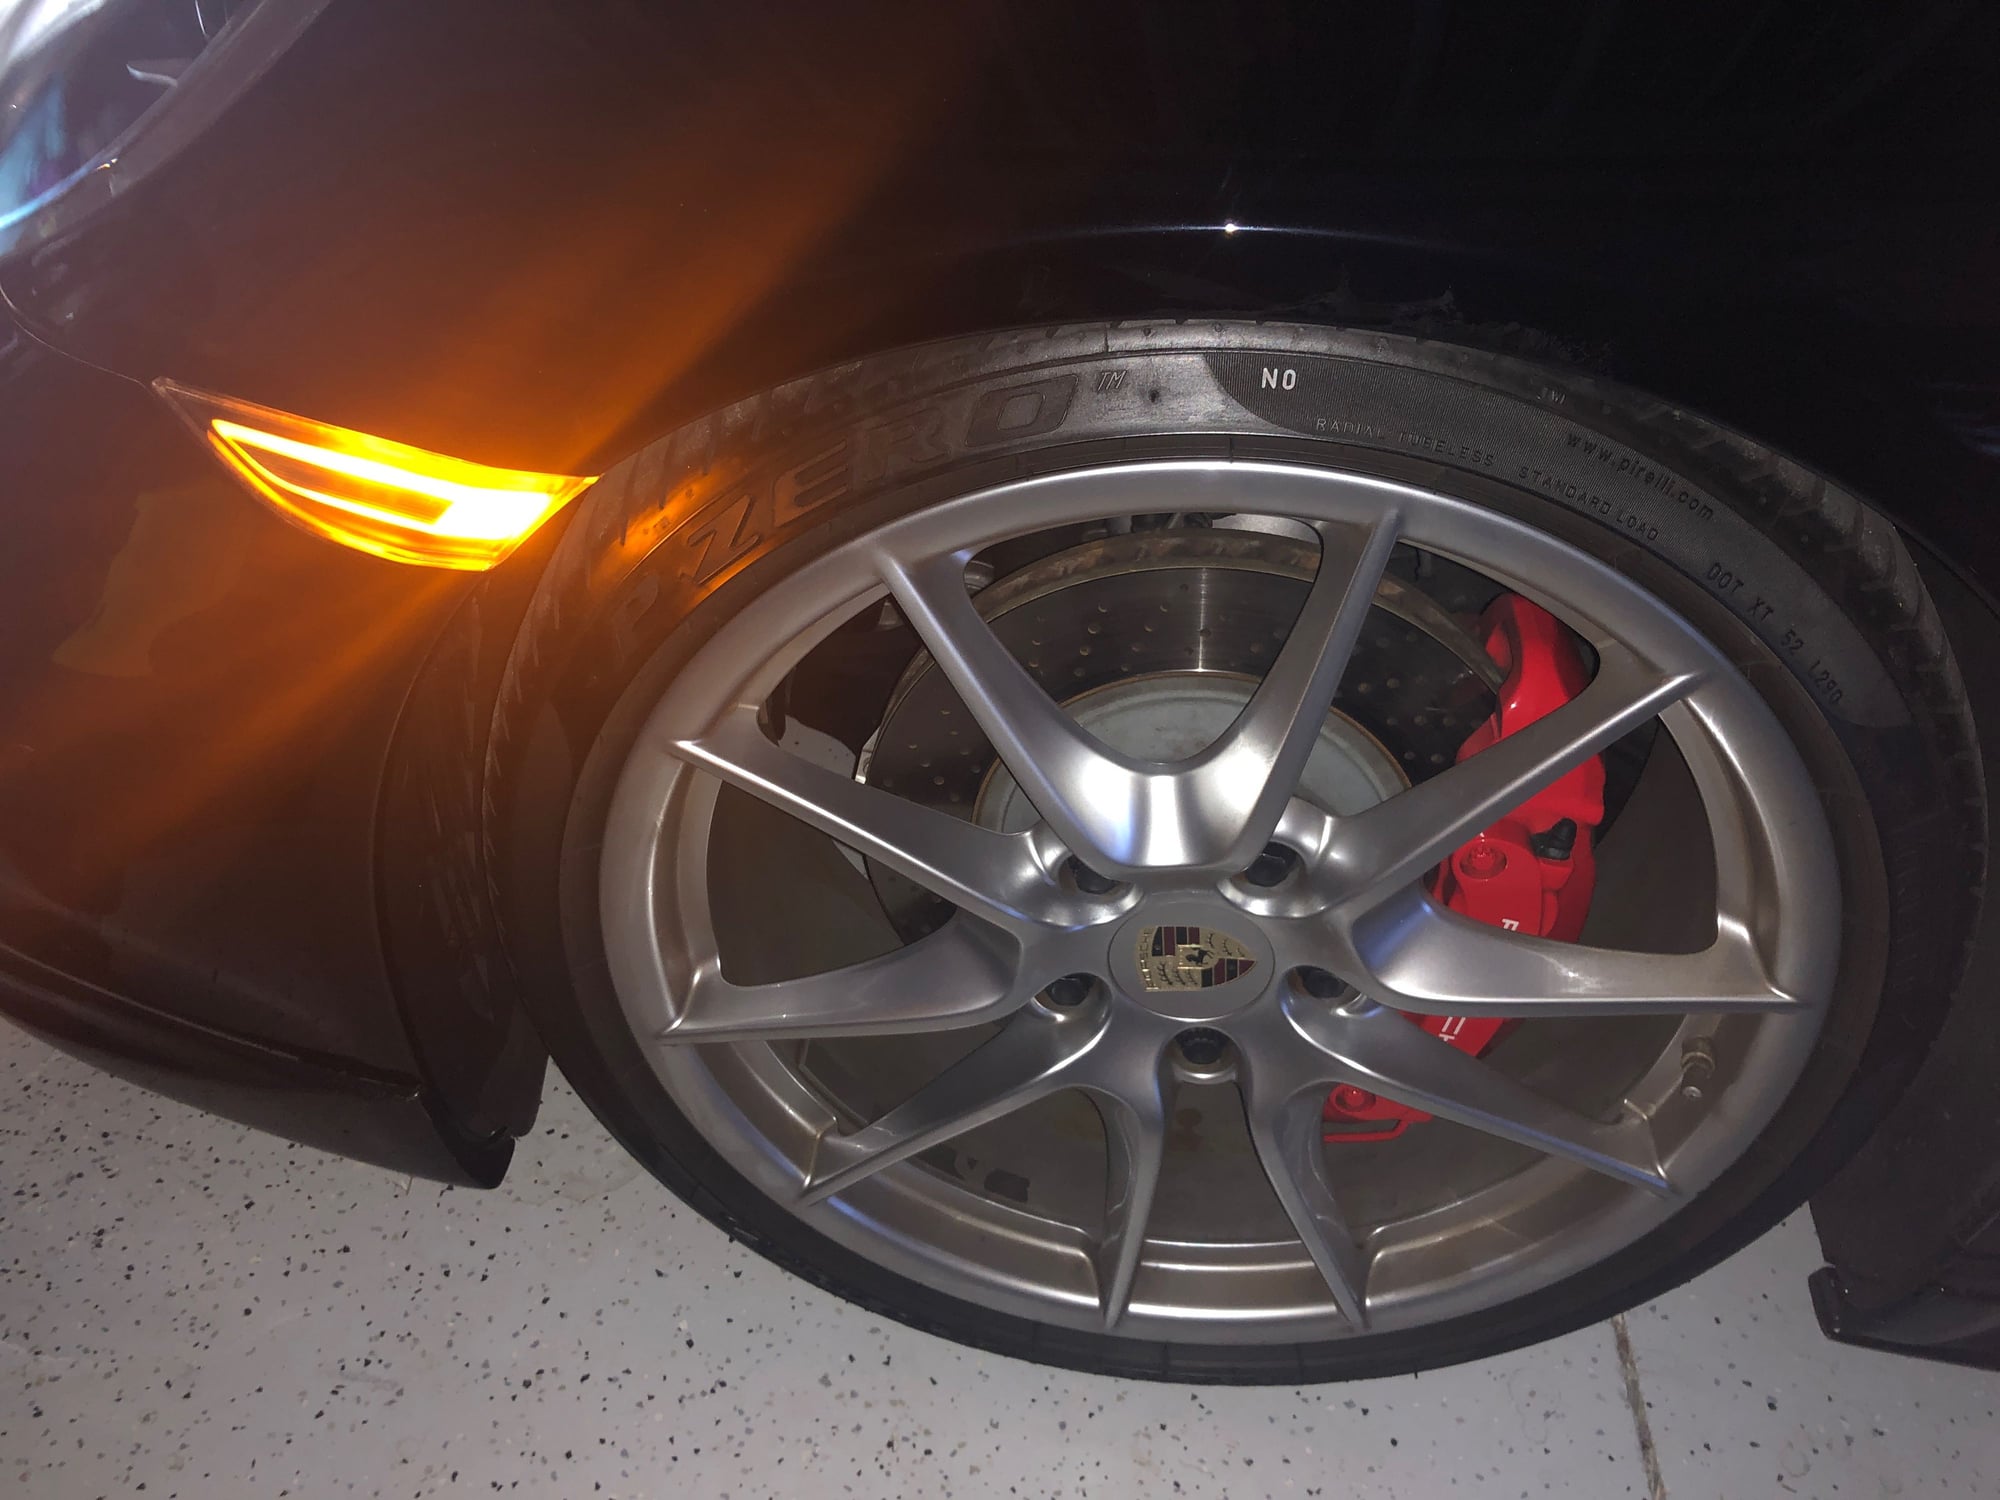 Wheels and Tires/Axles - 20 inch 991 wheels /tires SOCAL - Used - 2012 to 2017 Porsche 911 - Cypress, CA 90630, United States